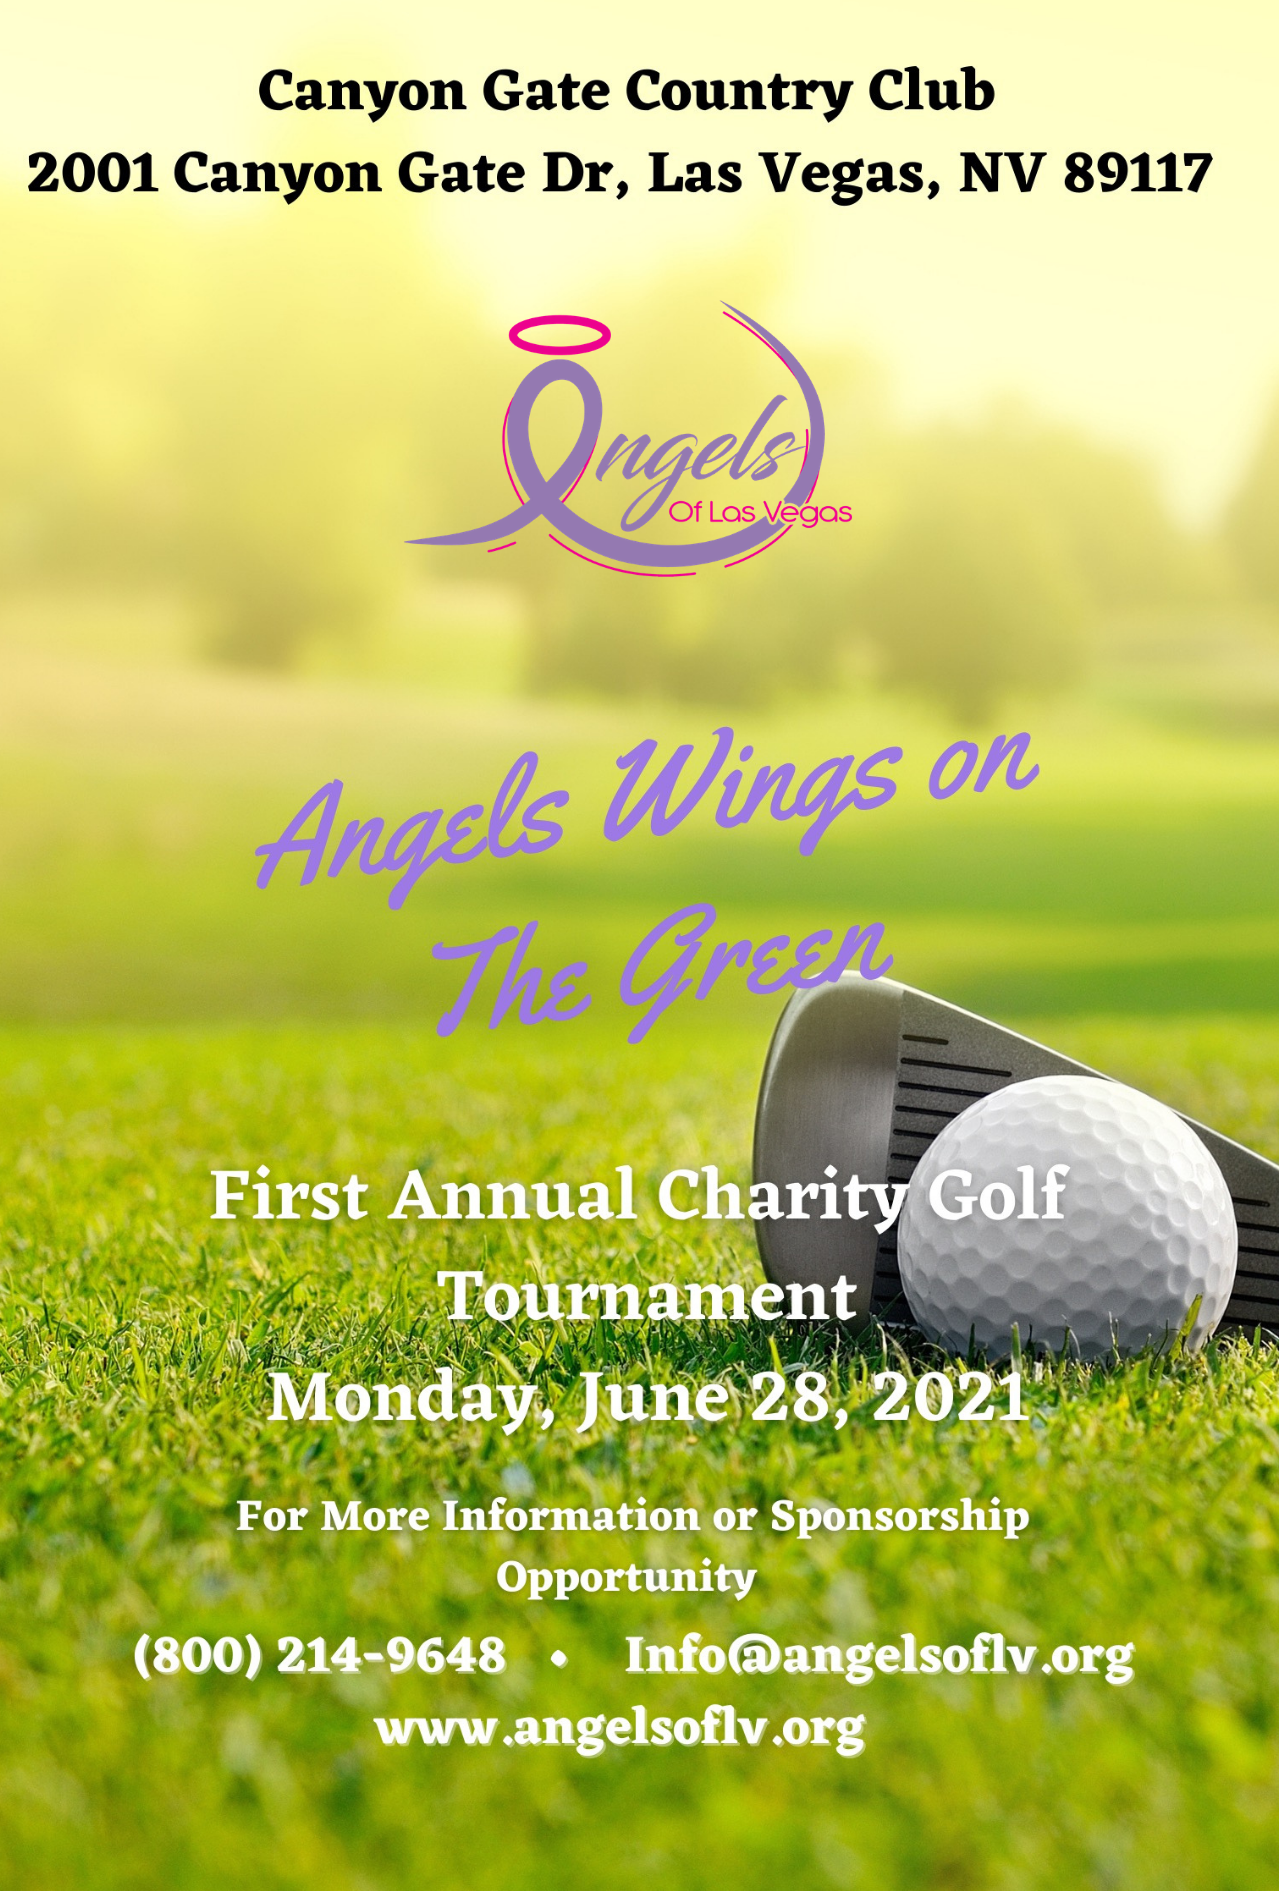 Angels Wings on The Green 1st Annual Charity Golf Tournament